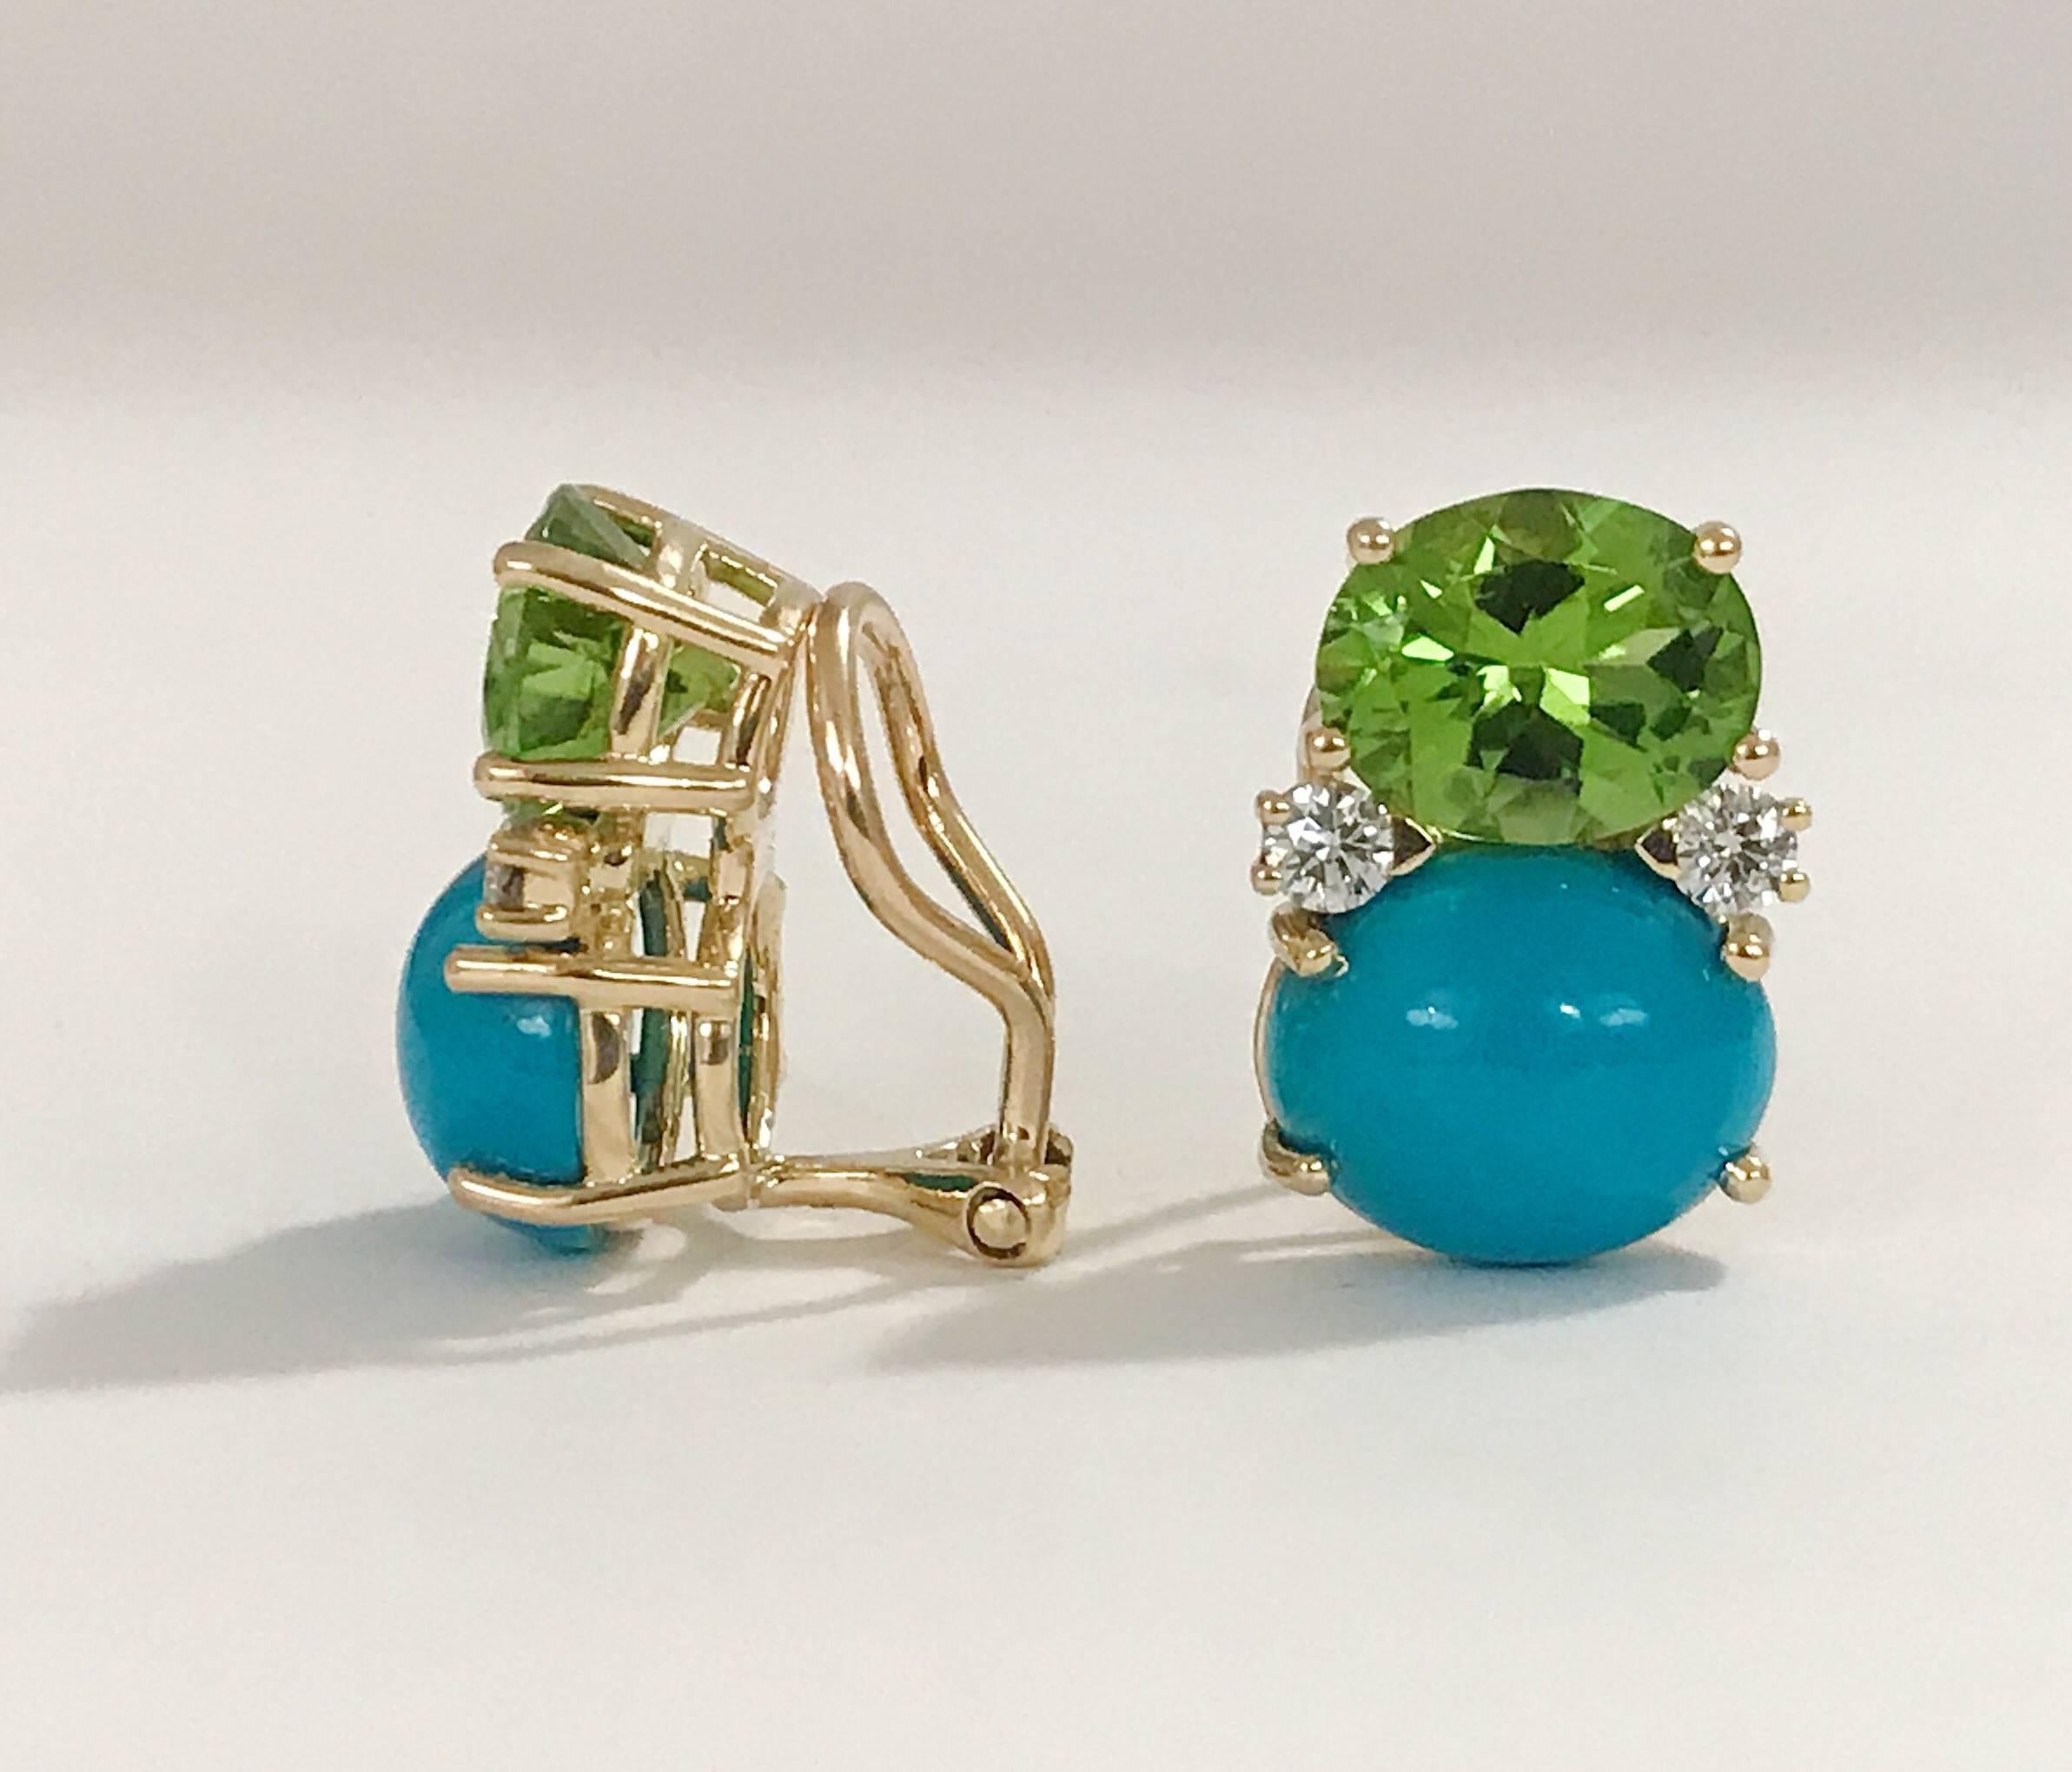 Medium 18kt yellow gold GUM DROP™ earrings with faceted Peridot (approximately 2.5 cts each), Cabochon Turquoise  (approximately 5 cts each), and 4 diamonds weighing ~0.40 cts.  
 Specifications: Height: 3/4